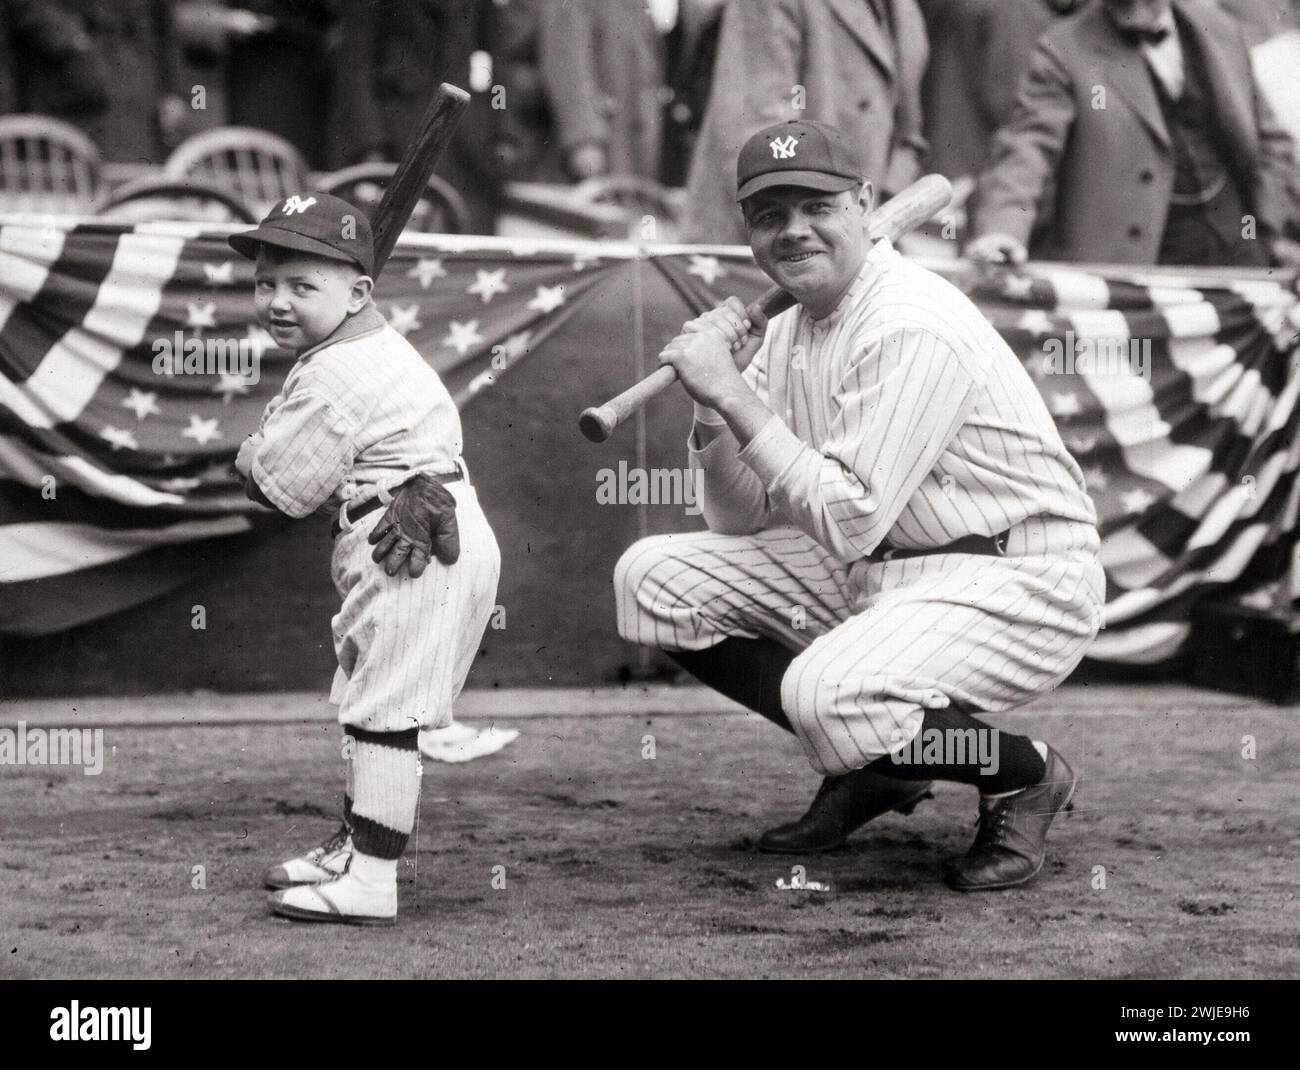 Babe Ruth & Mascot Yankee Stadium Opening Day - photo de Paul Thompson, 1923 Banque D'Images